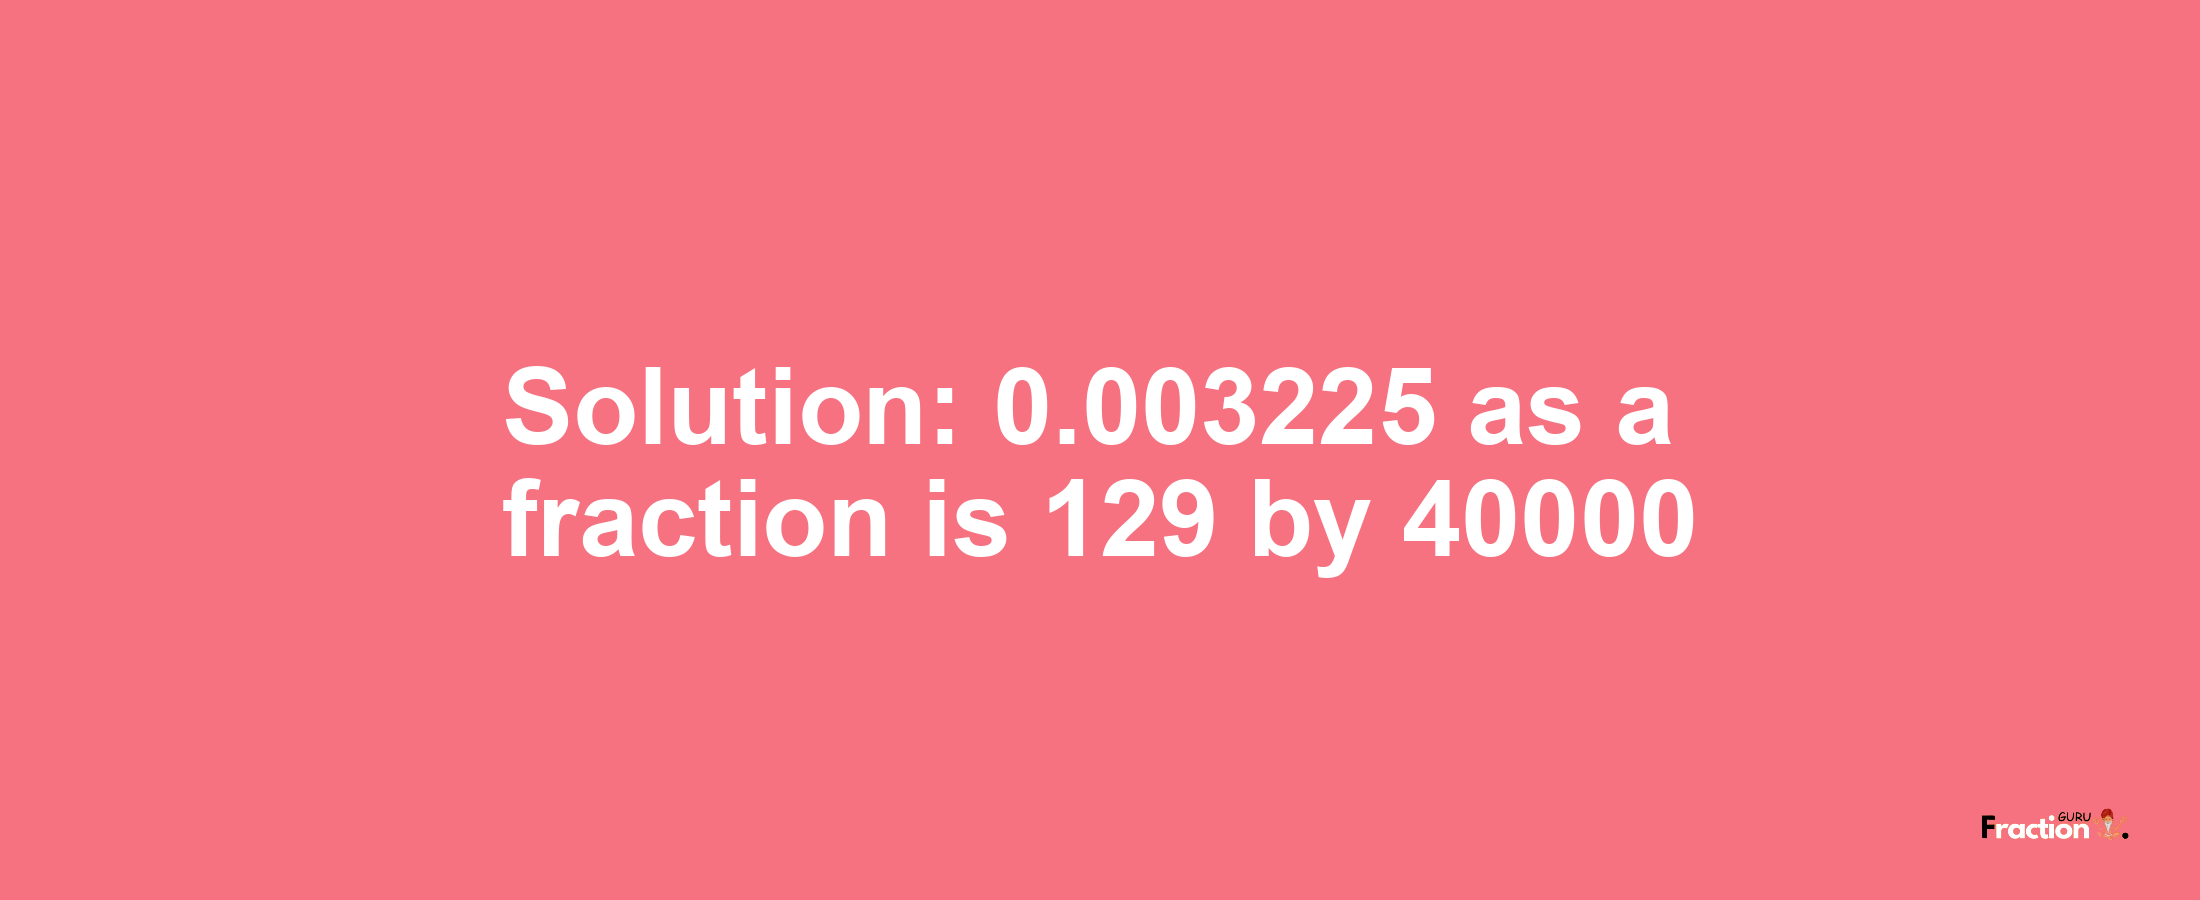 Solution:0.003225 as a fraction is 129/40000